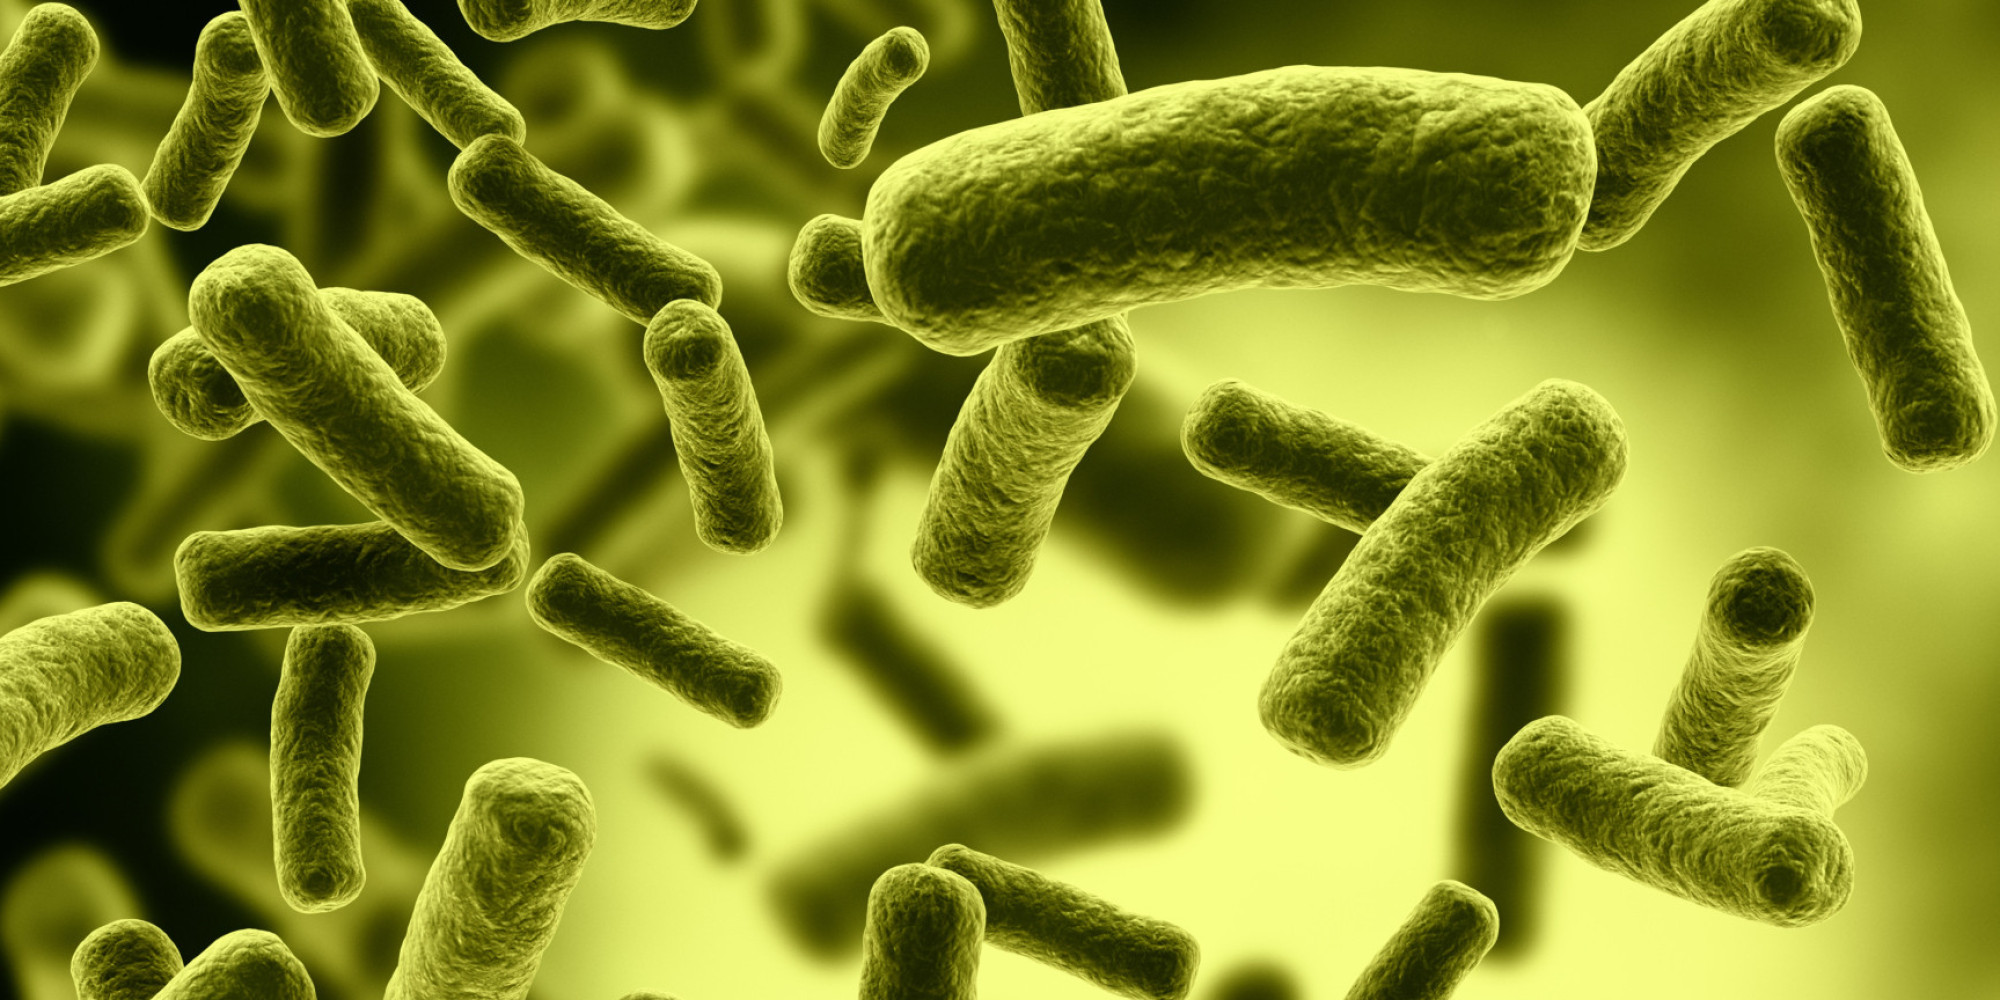 The War On Bacteria -- Who Are We Really Harming? | HuffPost